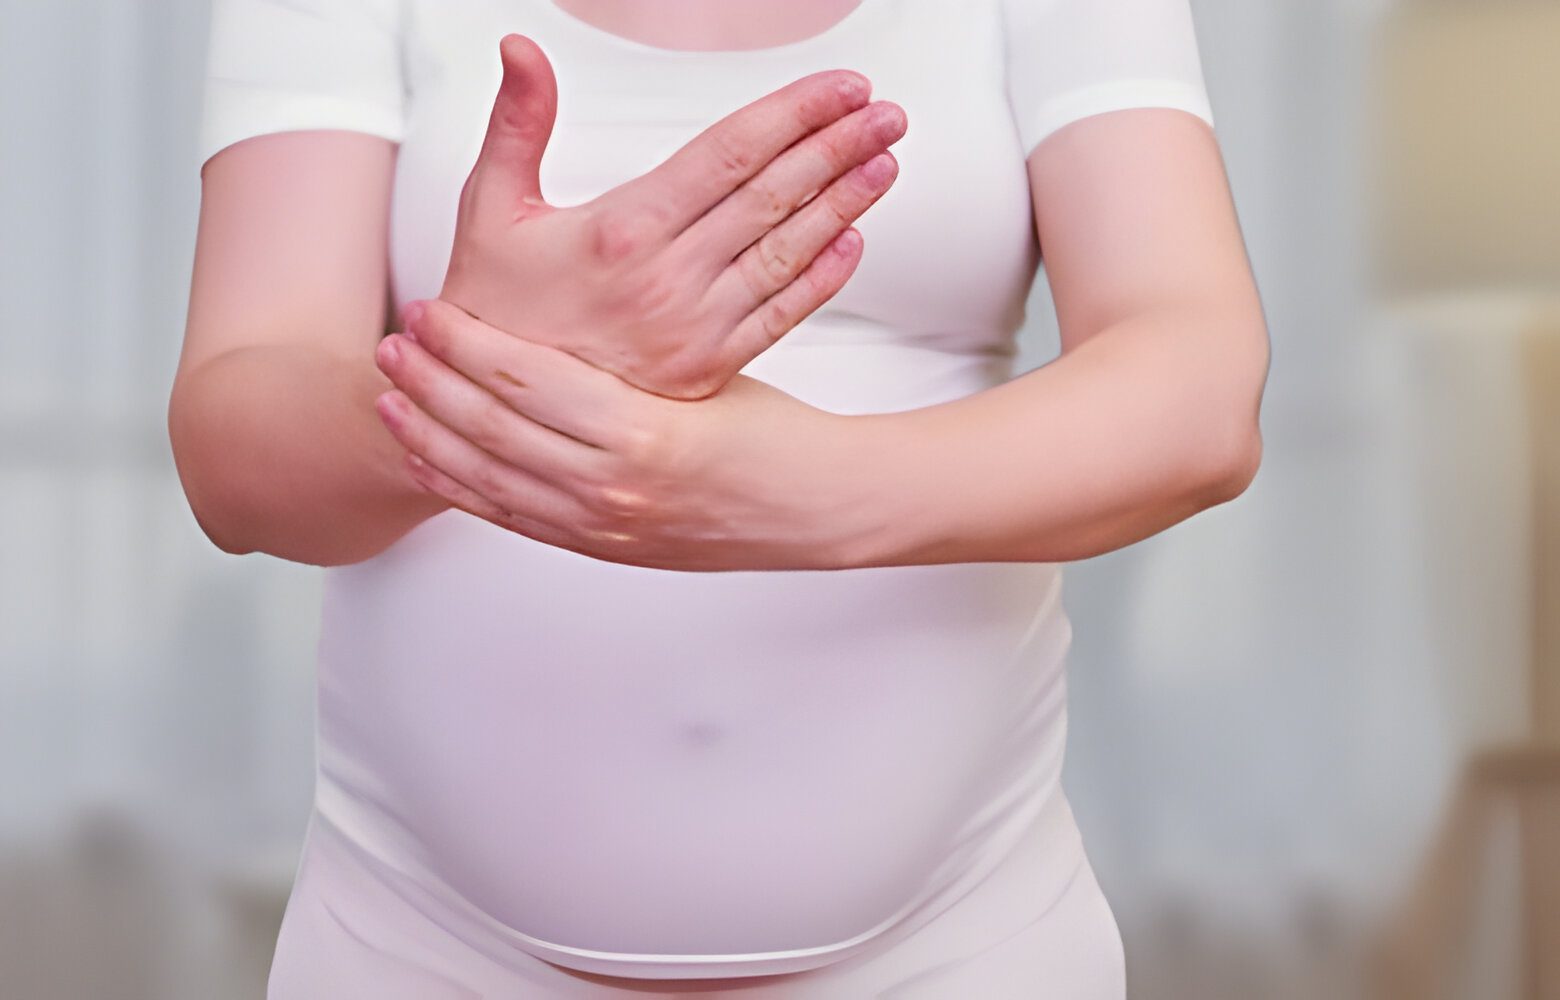 Carpal Tunnel Syndrome During Pregnancy: Symptoms, Diagnosis and Treatment